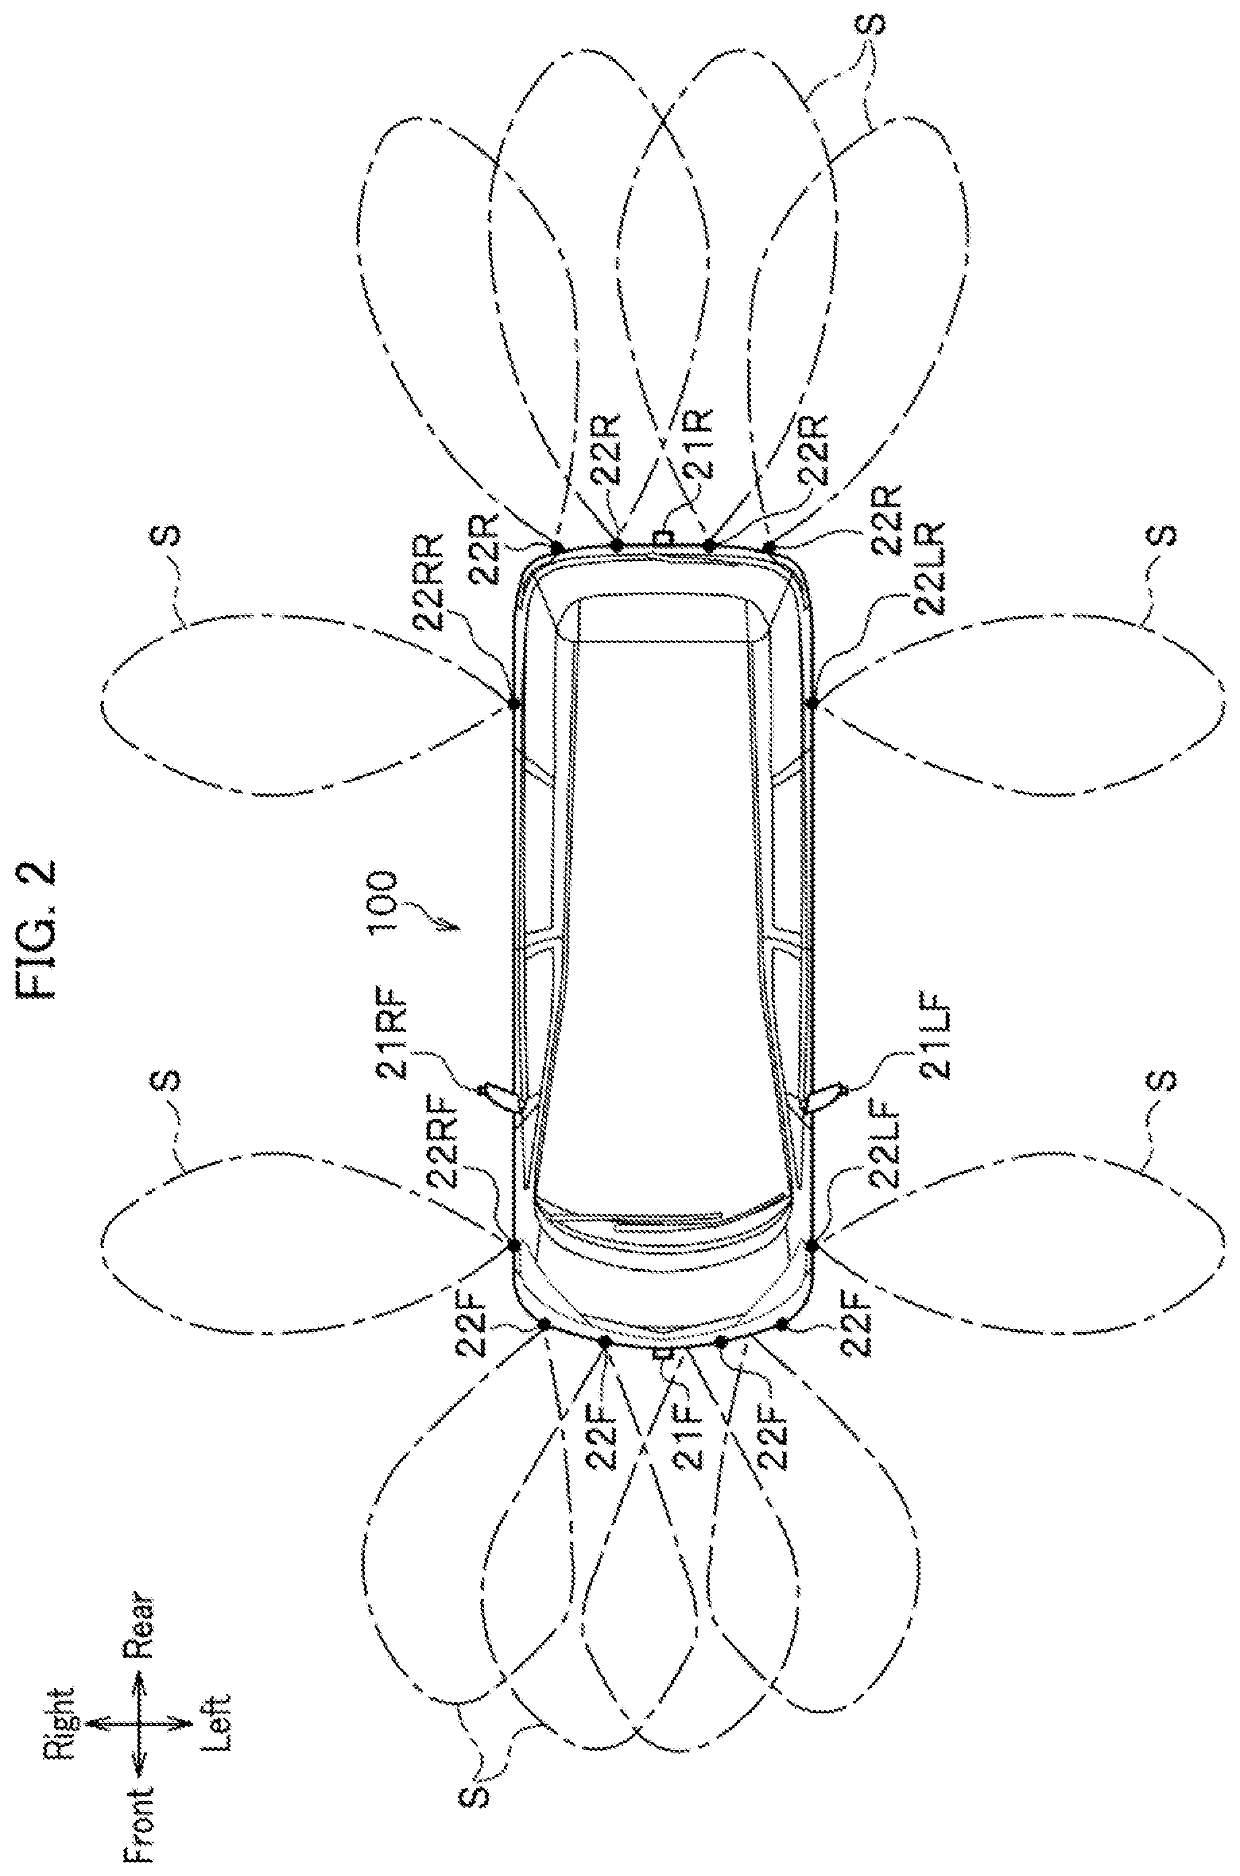 Parking assist system and vehicle with automated parking capability